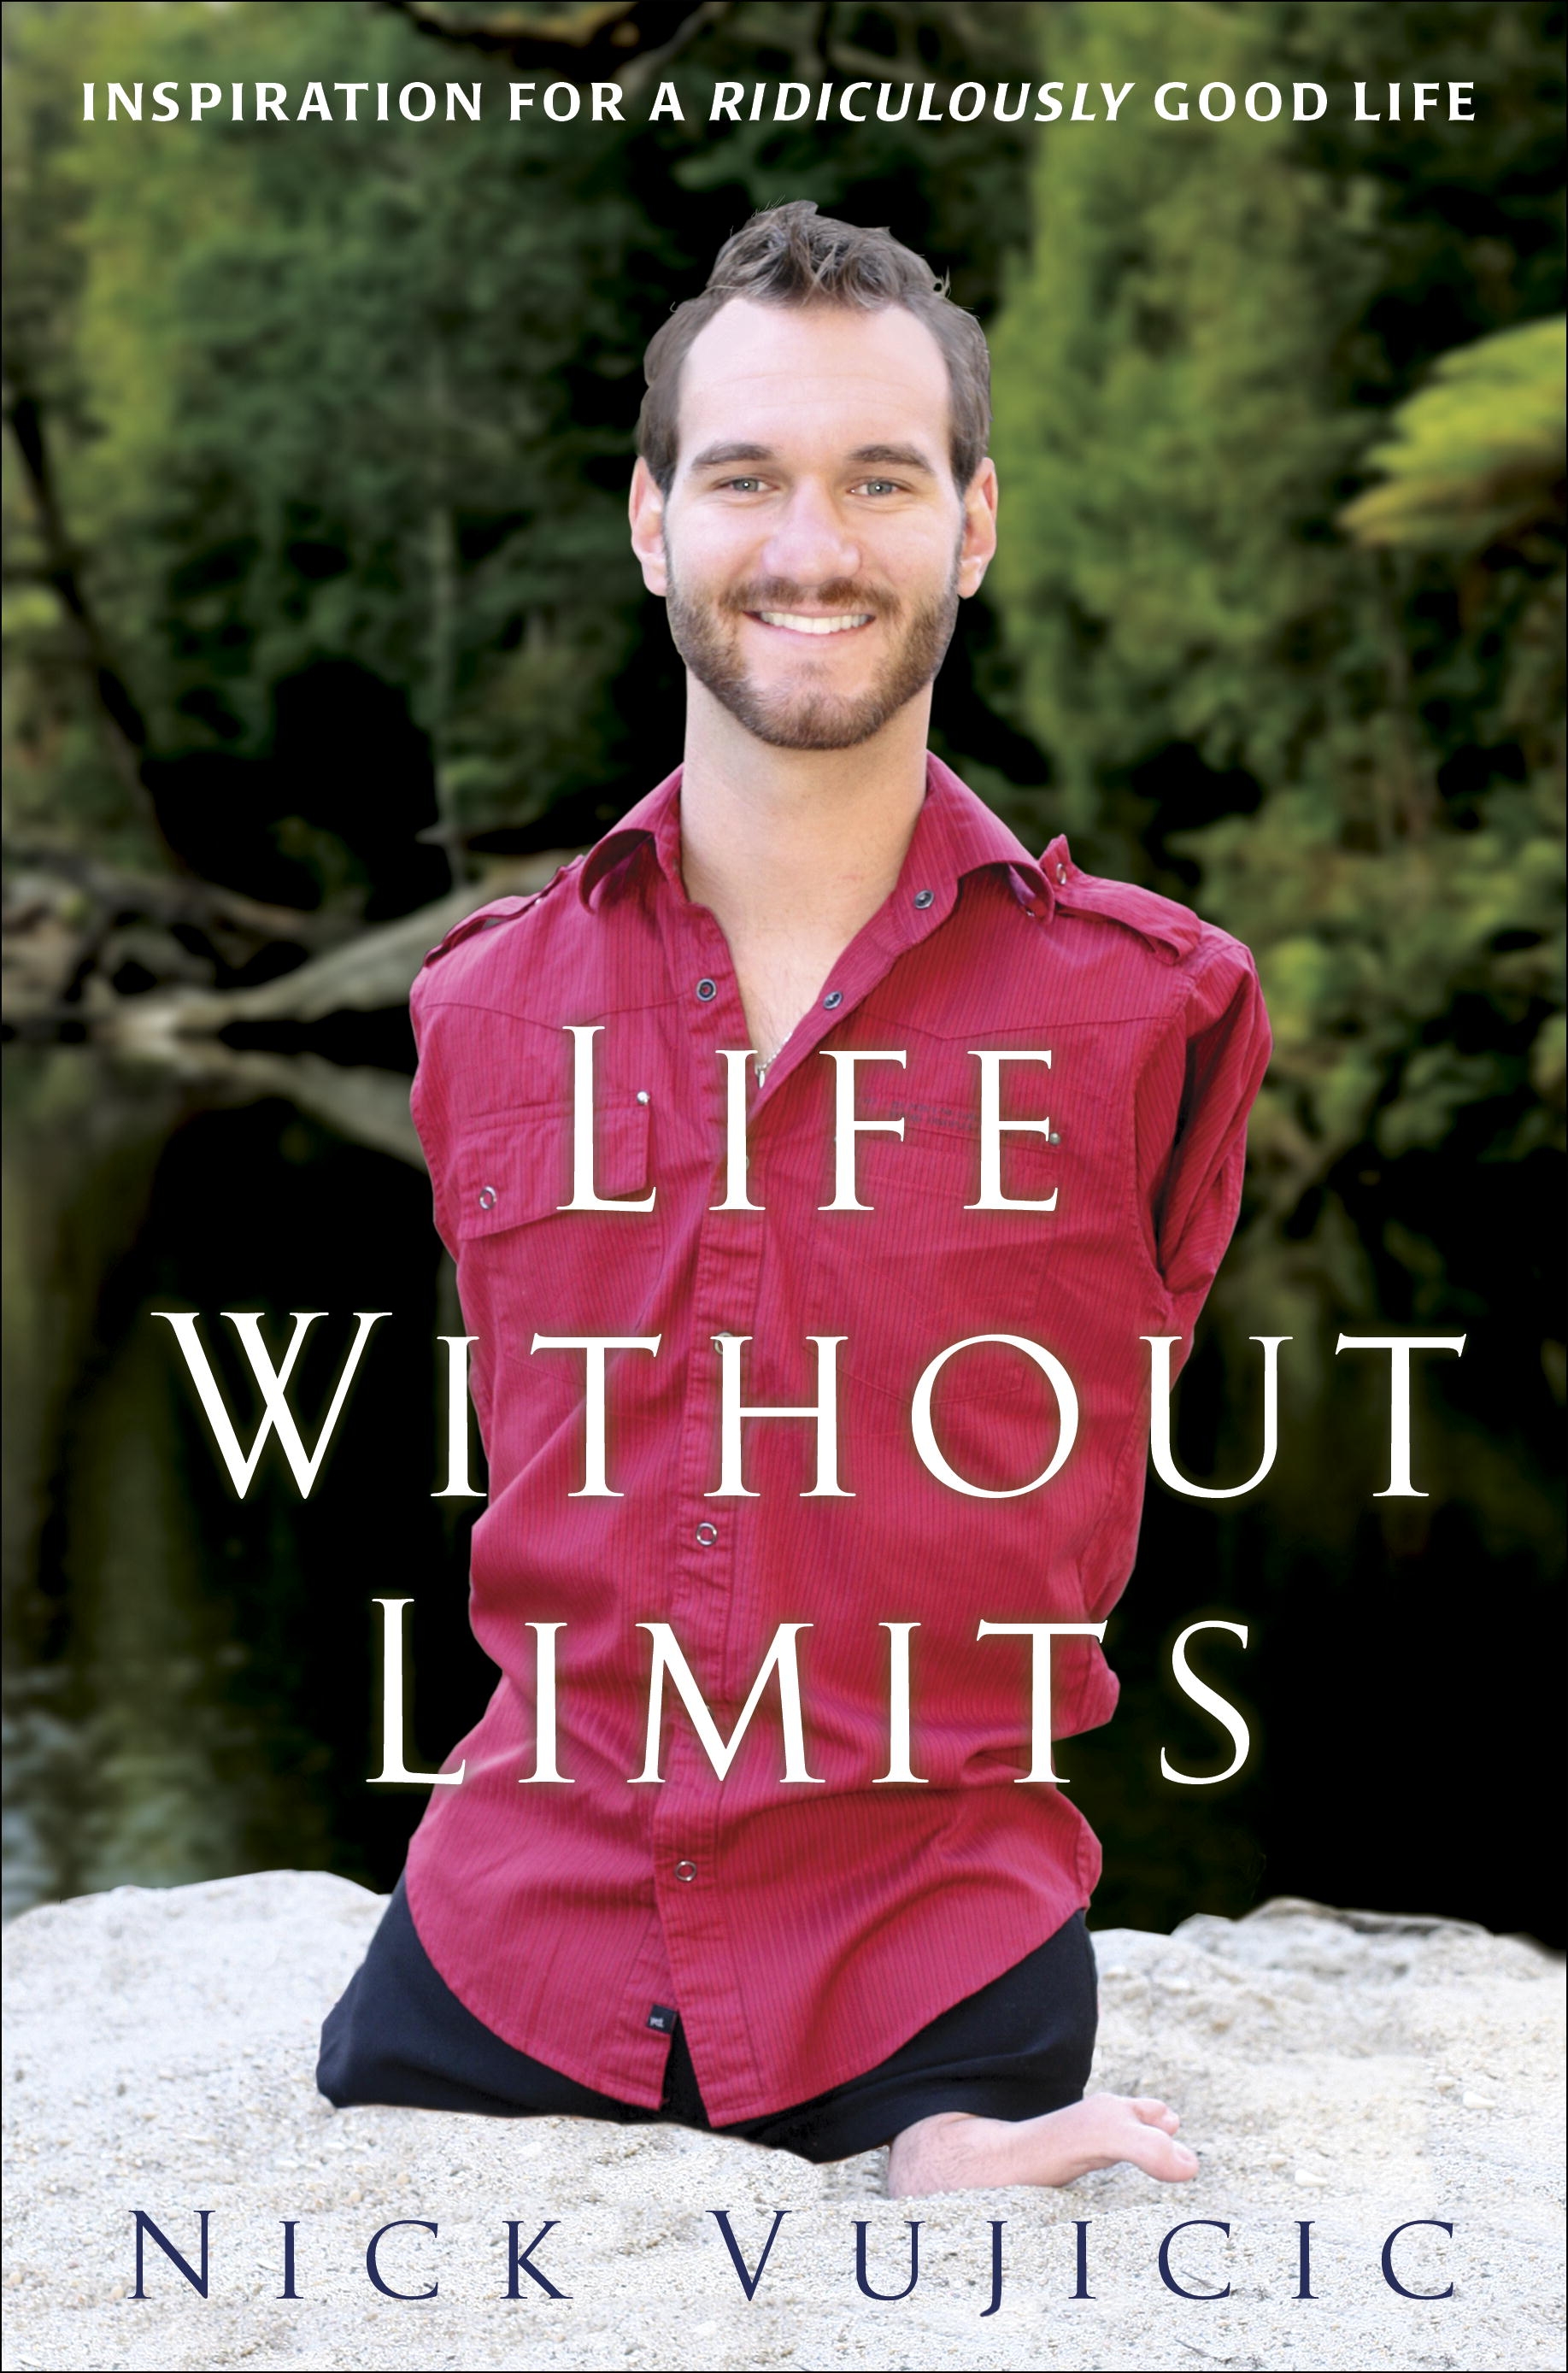 Life without limits photo